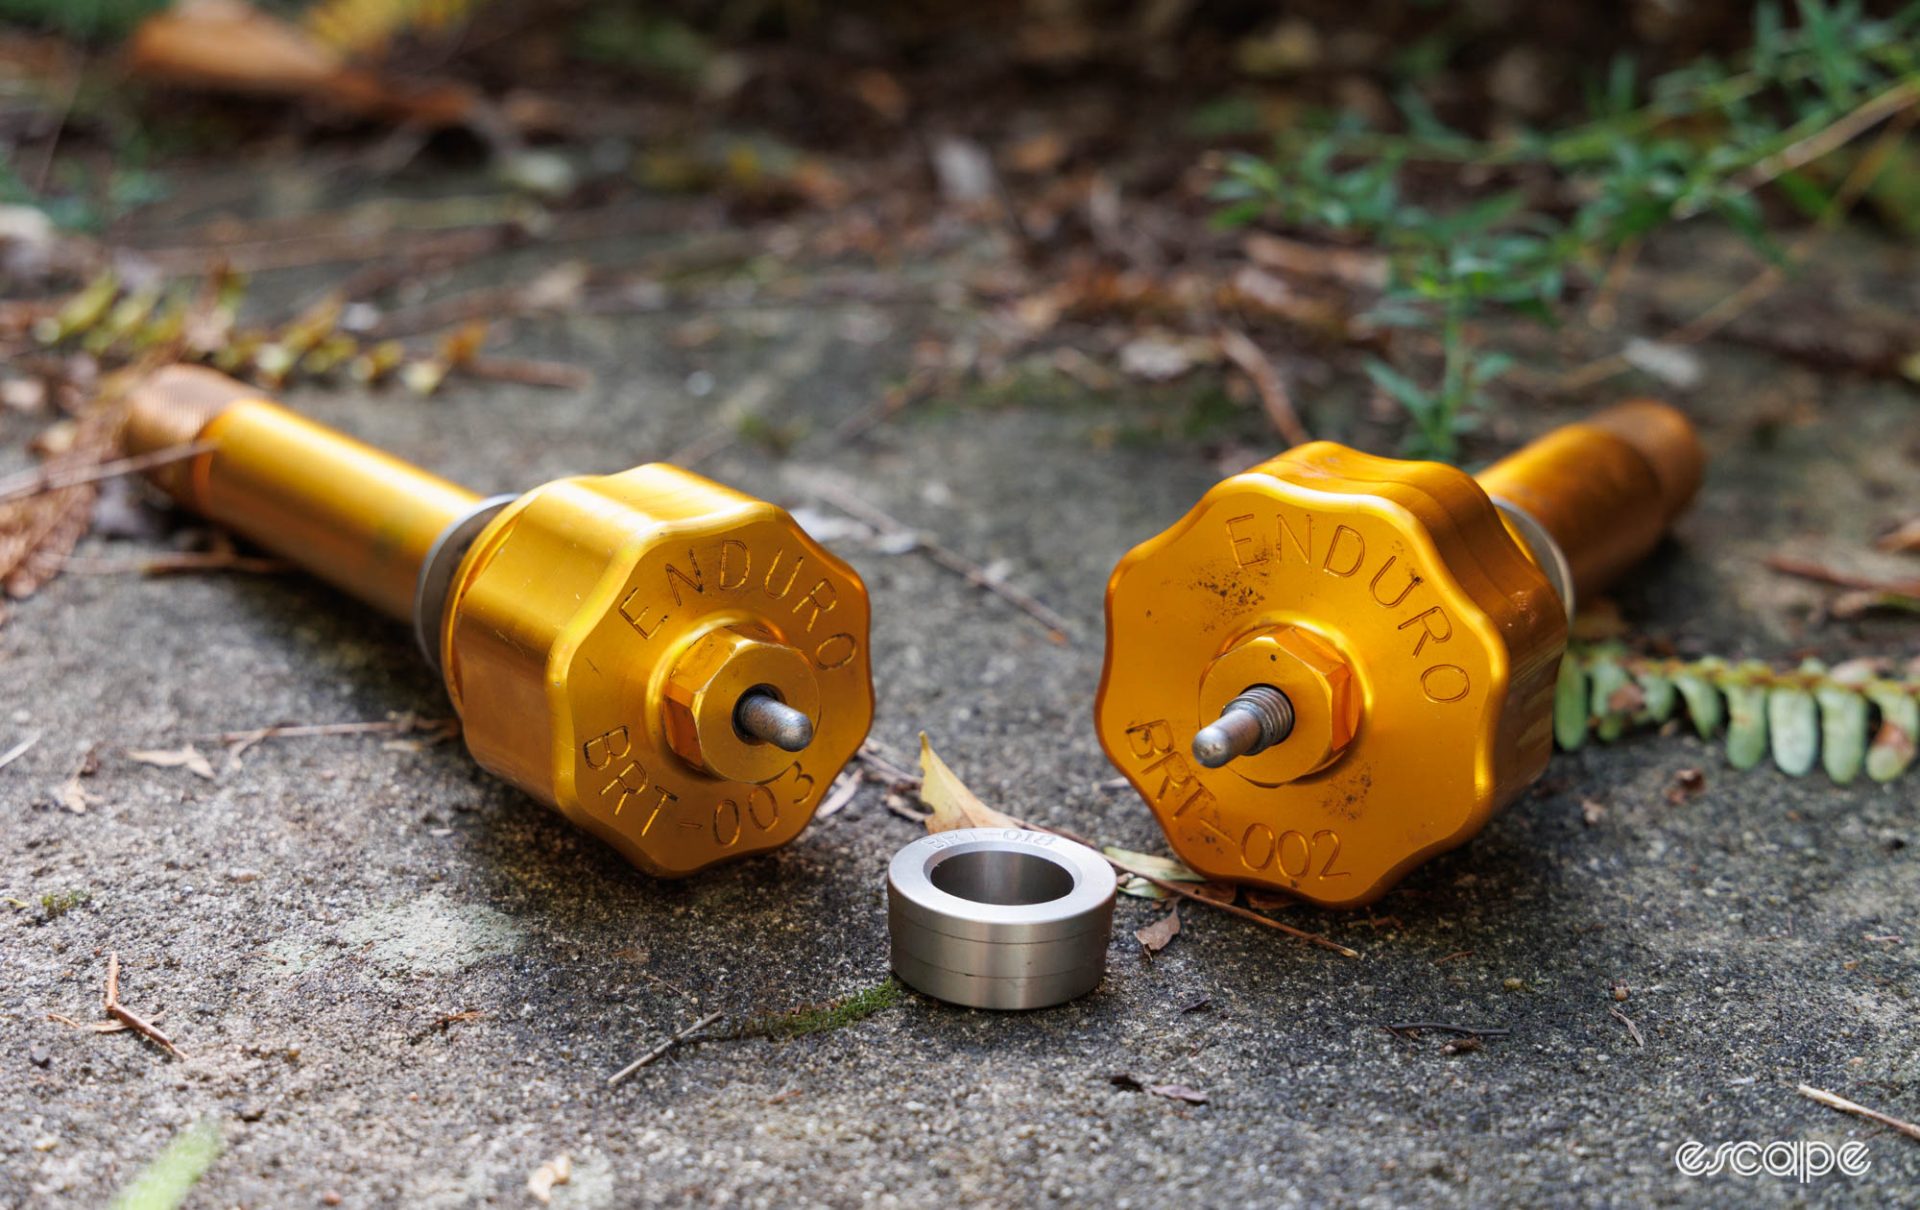 Enduro bearing press fit tools in the usual gold colour sitting on a mossy tile. 